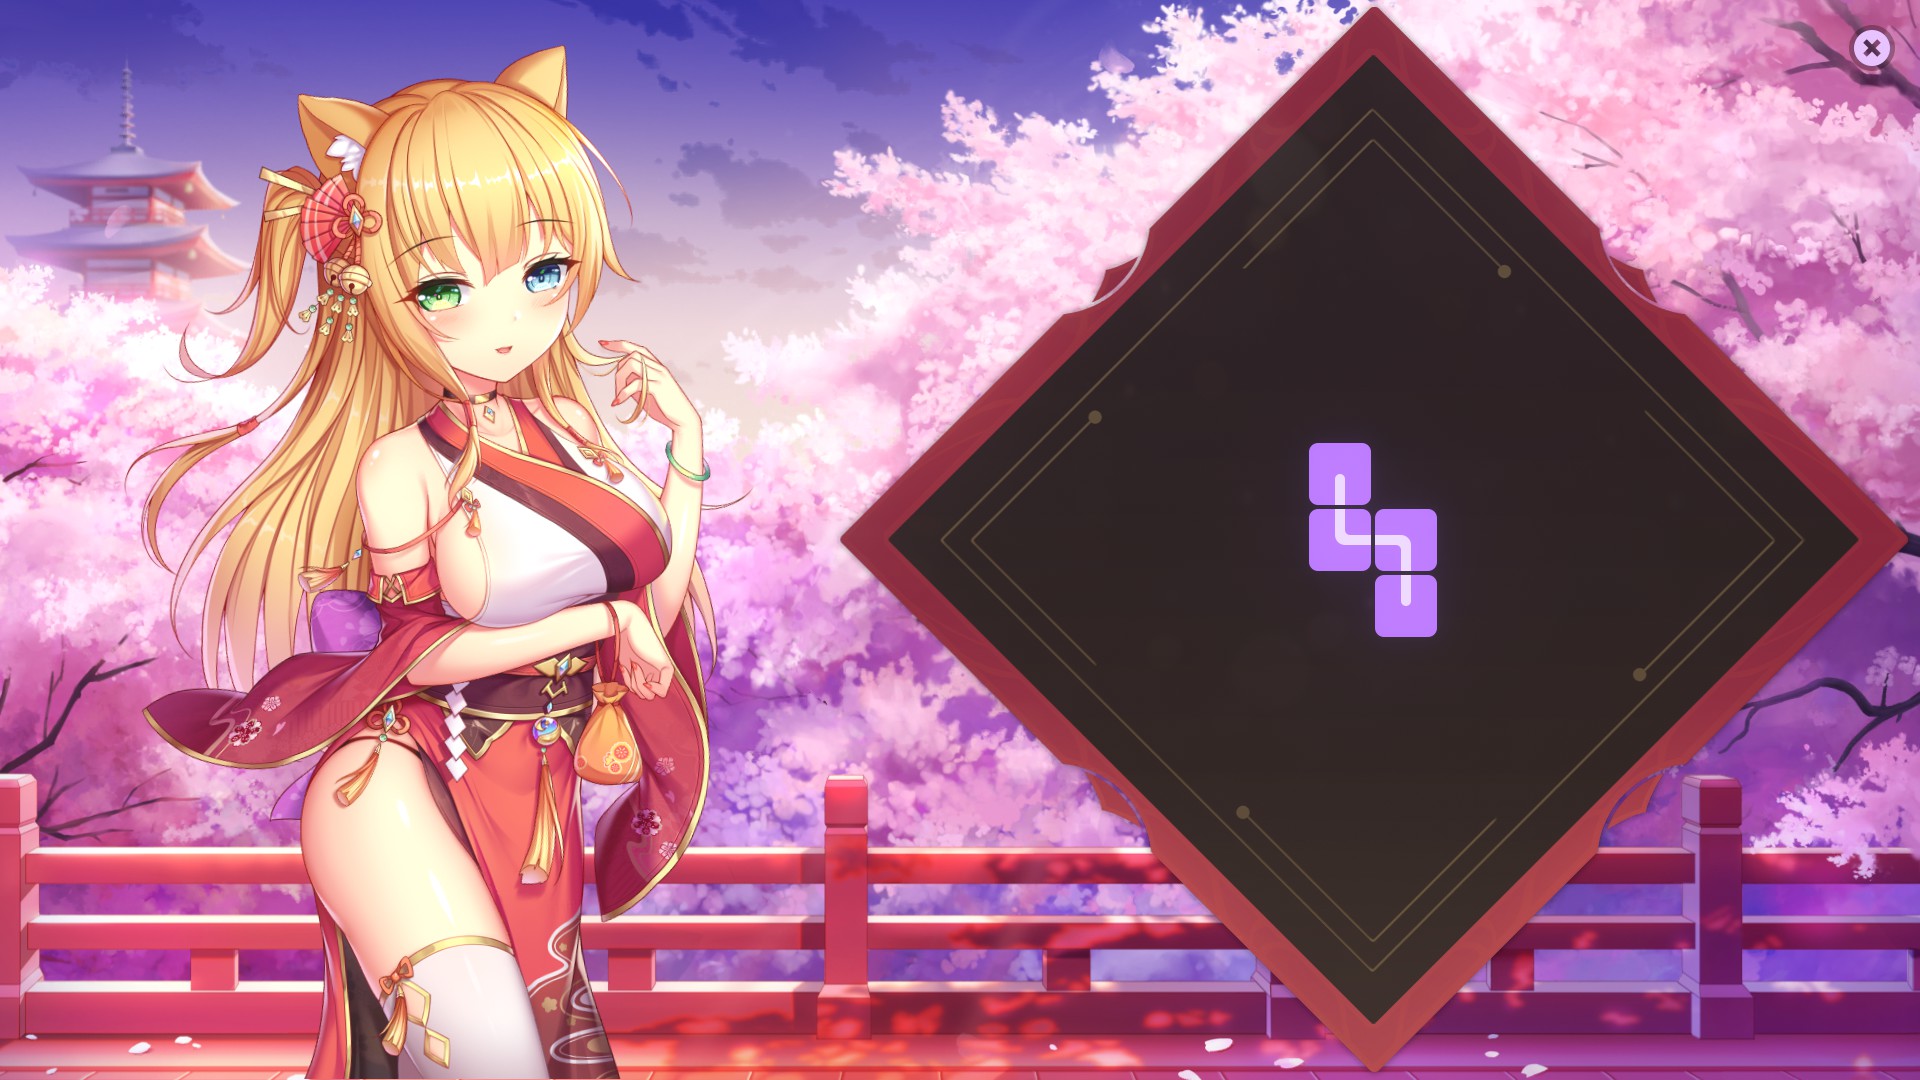 Sakura Hime 2 Achievement Guide - Images of completed levels - 33B1081